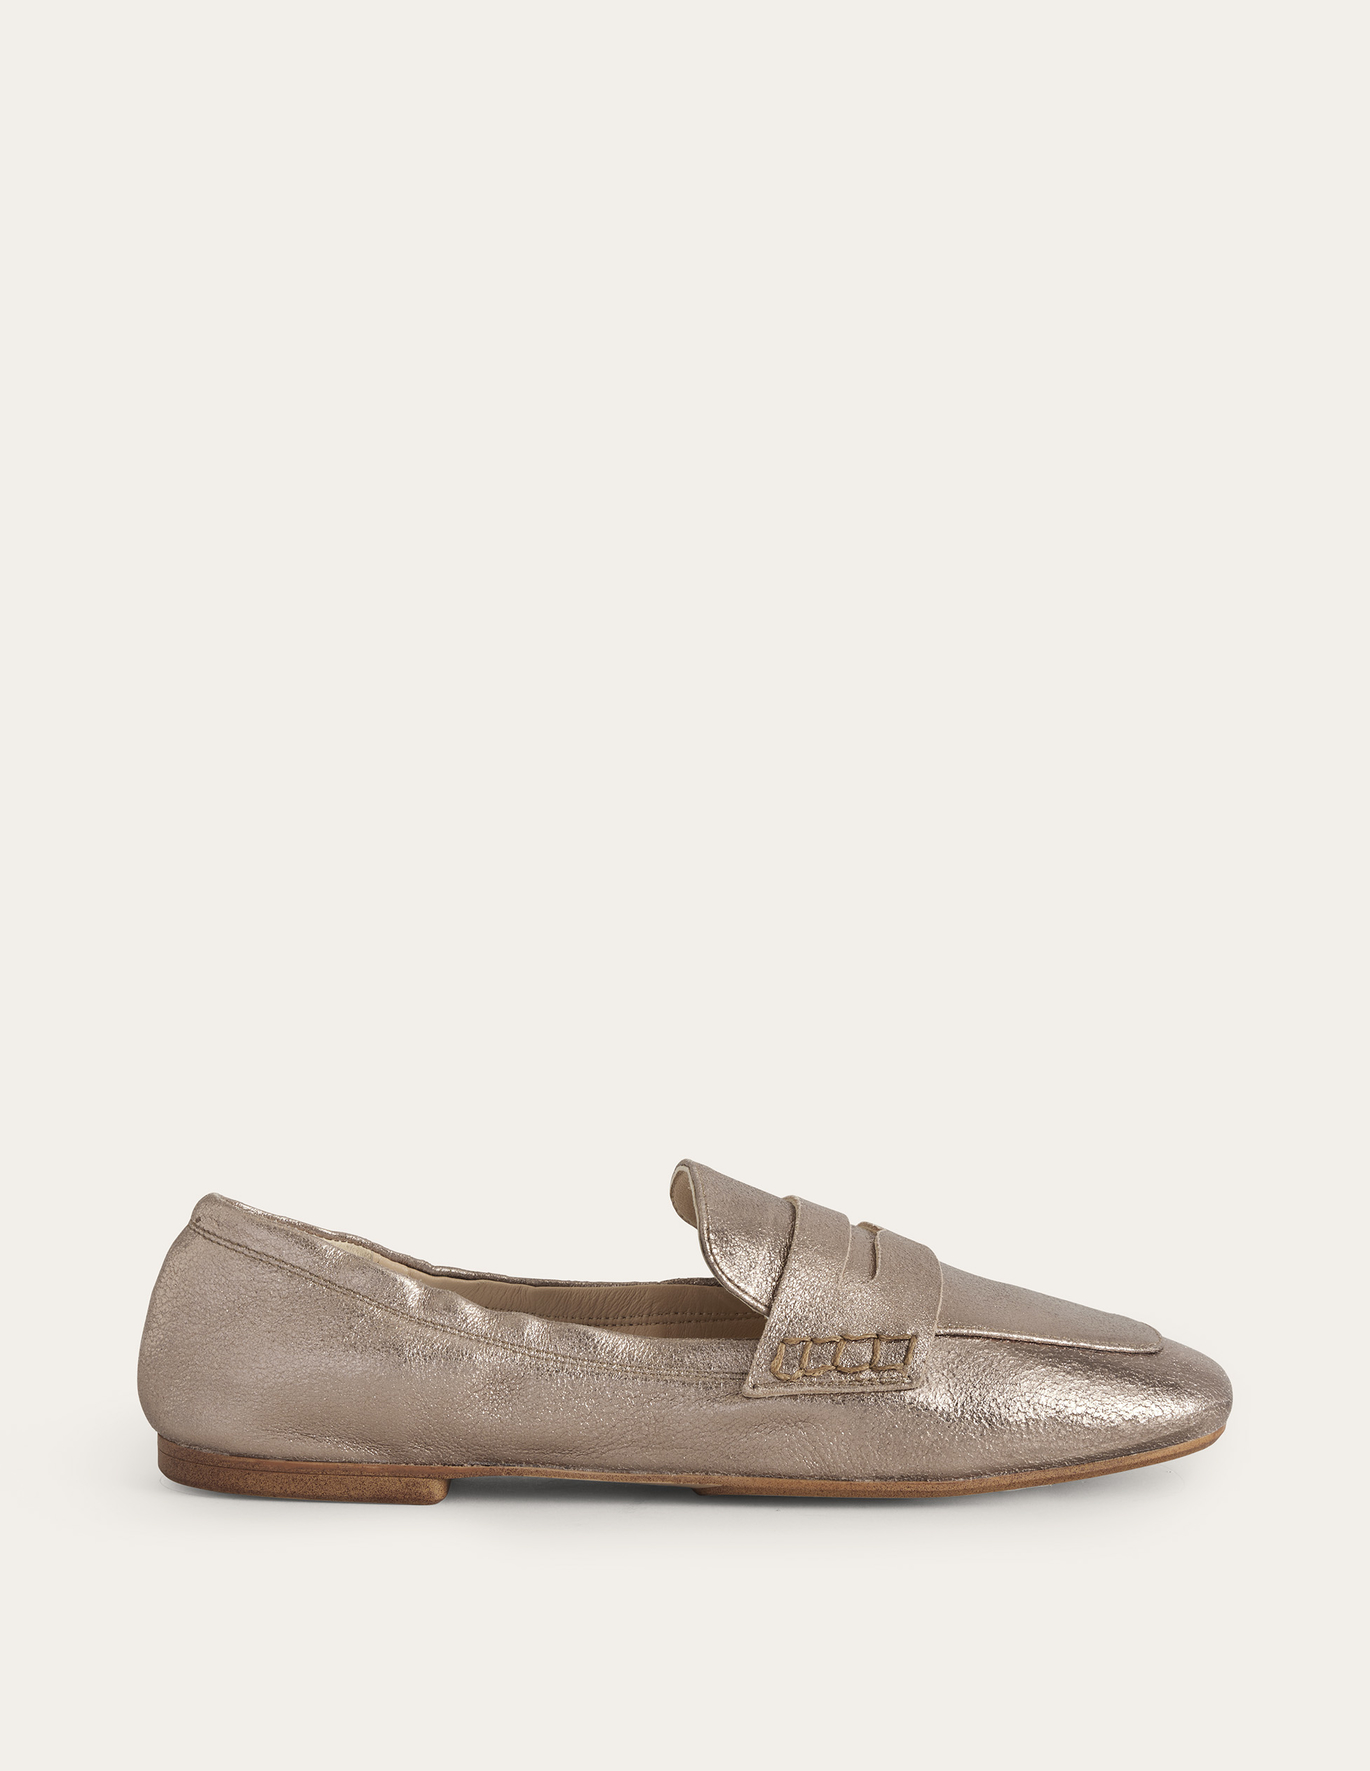 Boden Flexible Sole Loafers - Gold